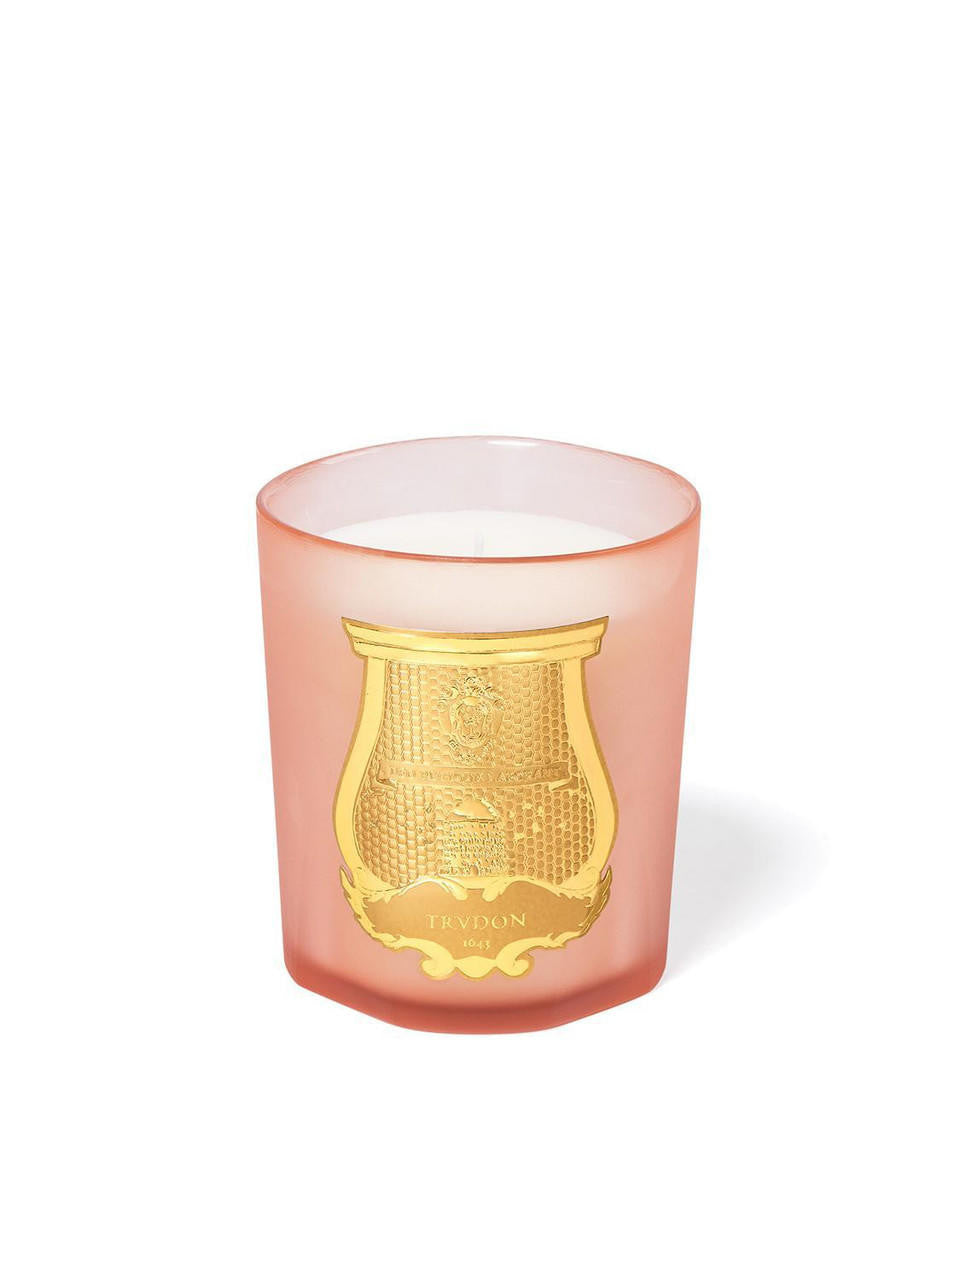  Trudon Tuileries Candle 